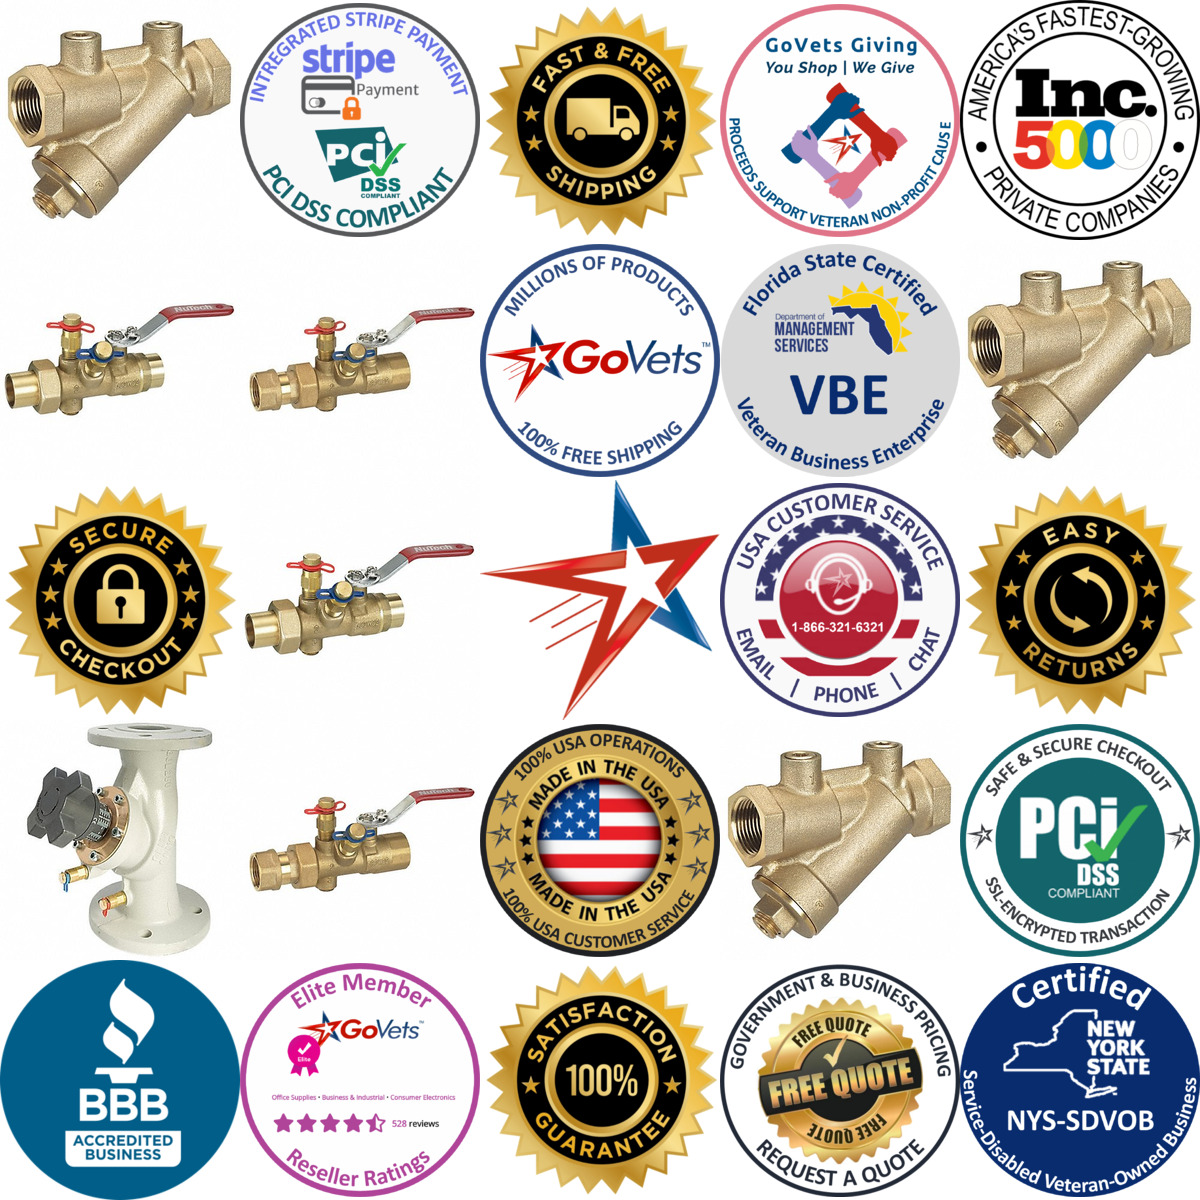 A selection of Balancing Valves products on GoVets